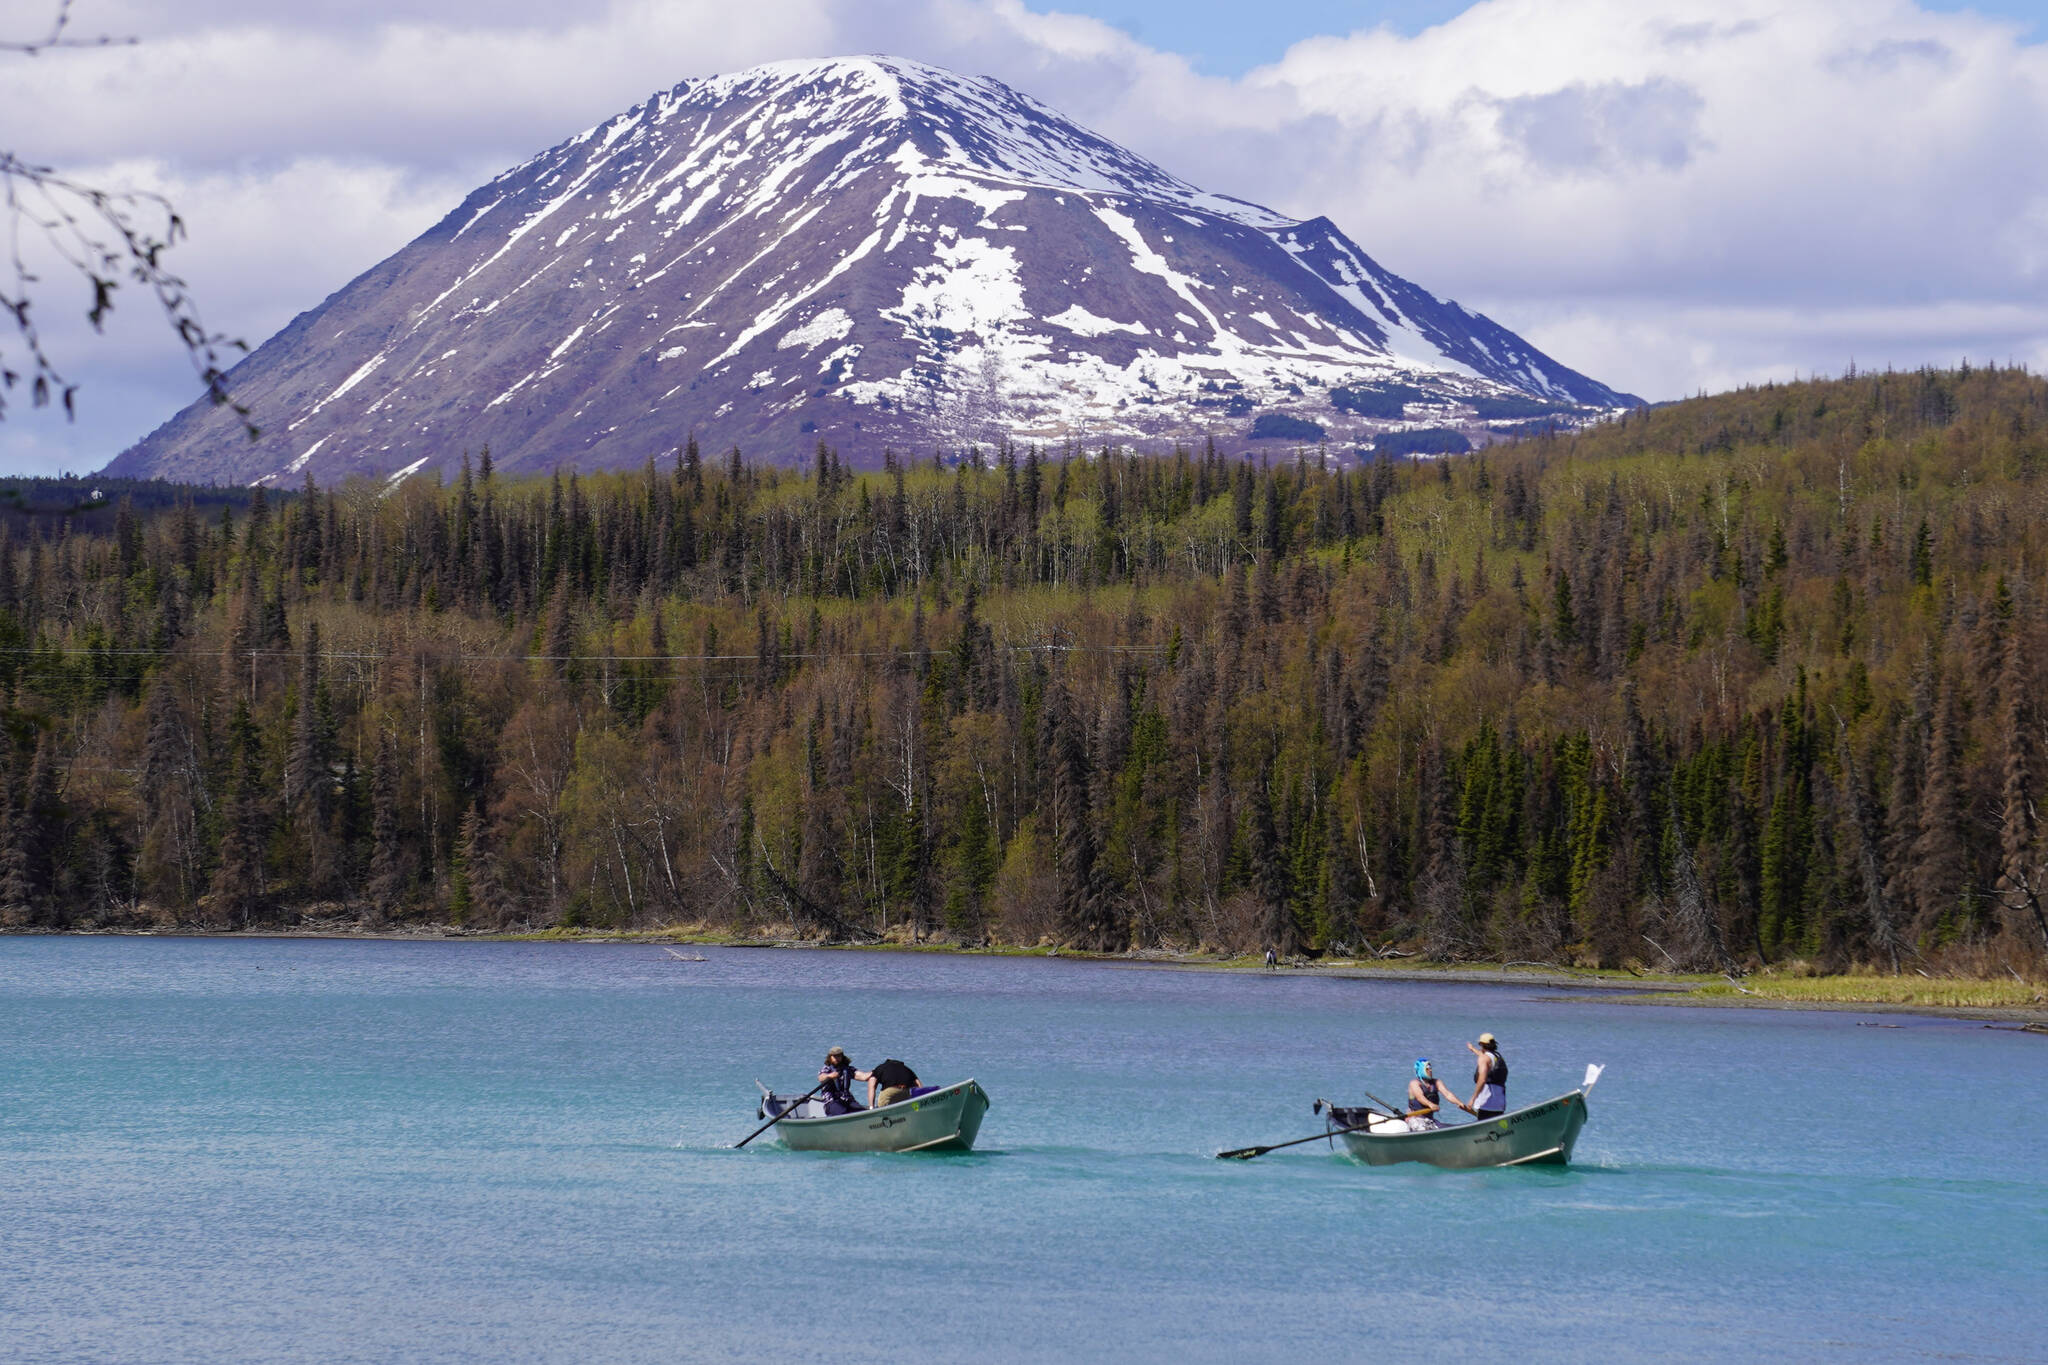 Contestants race down the Kenai River during the 16th Annual Cooper Landing Drift Boat Regata near the Eagle Landing Resort in Cooper Landing, Alaska on Saturday, May 20, 2023. (Jake Dye/Peninsula Clarion)